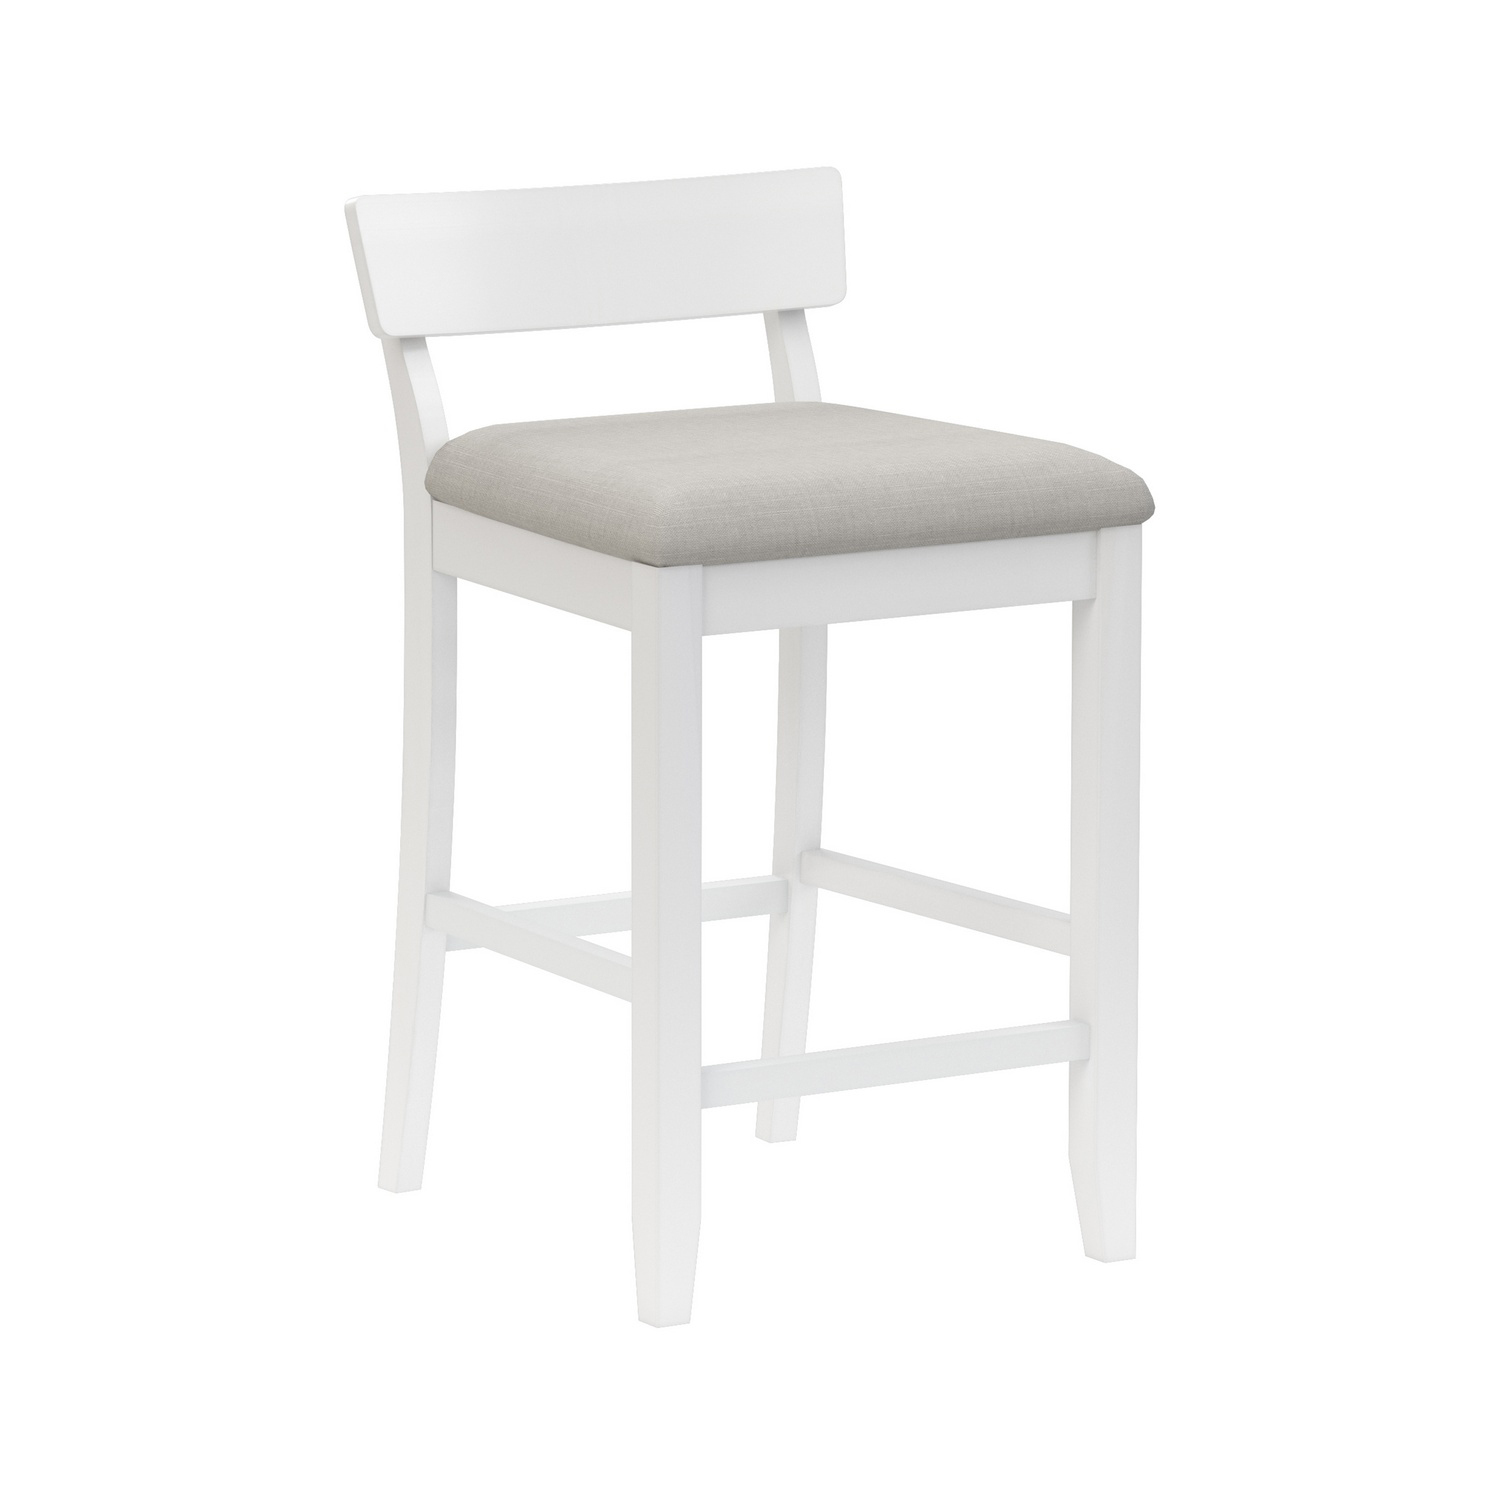 Hillsdale Warren Wood and Upholstered Counter Height Stool - Sea White